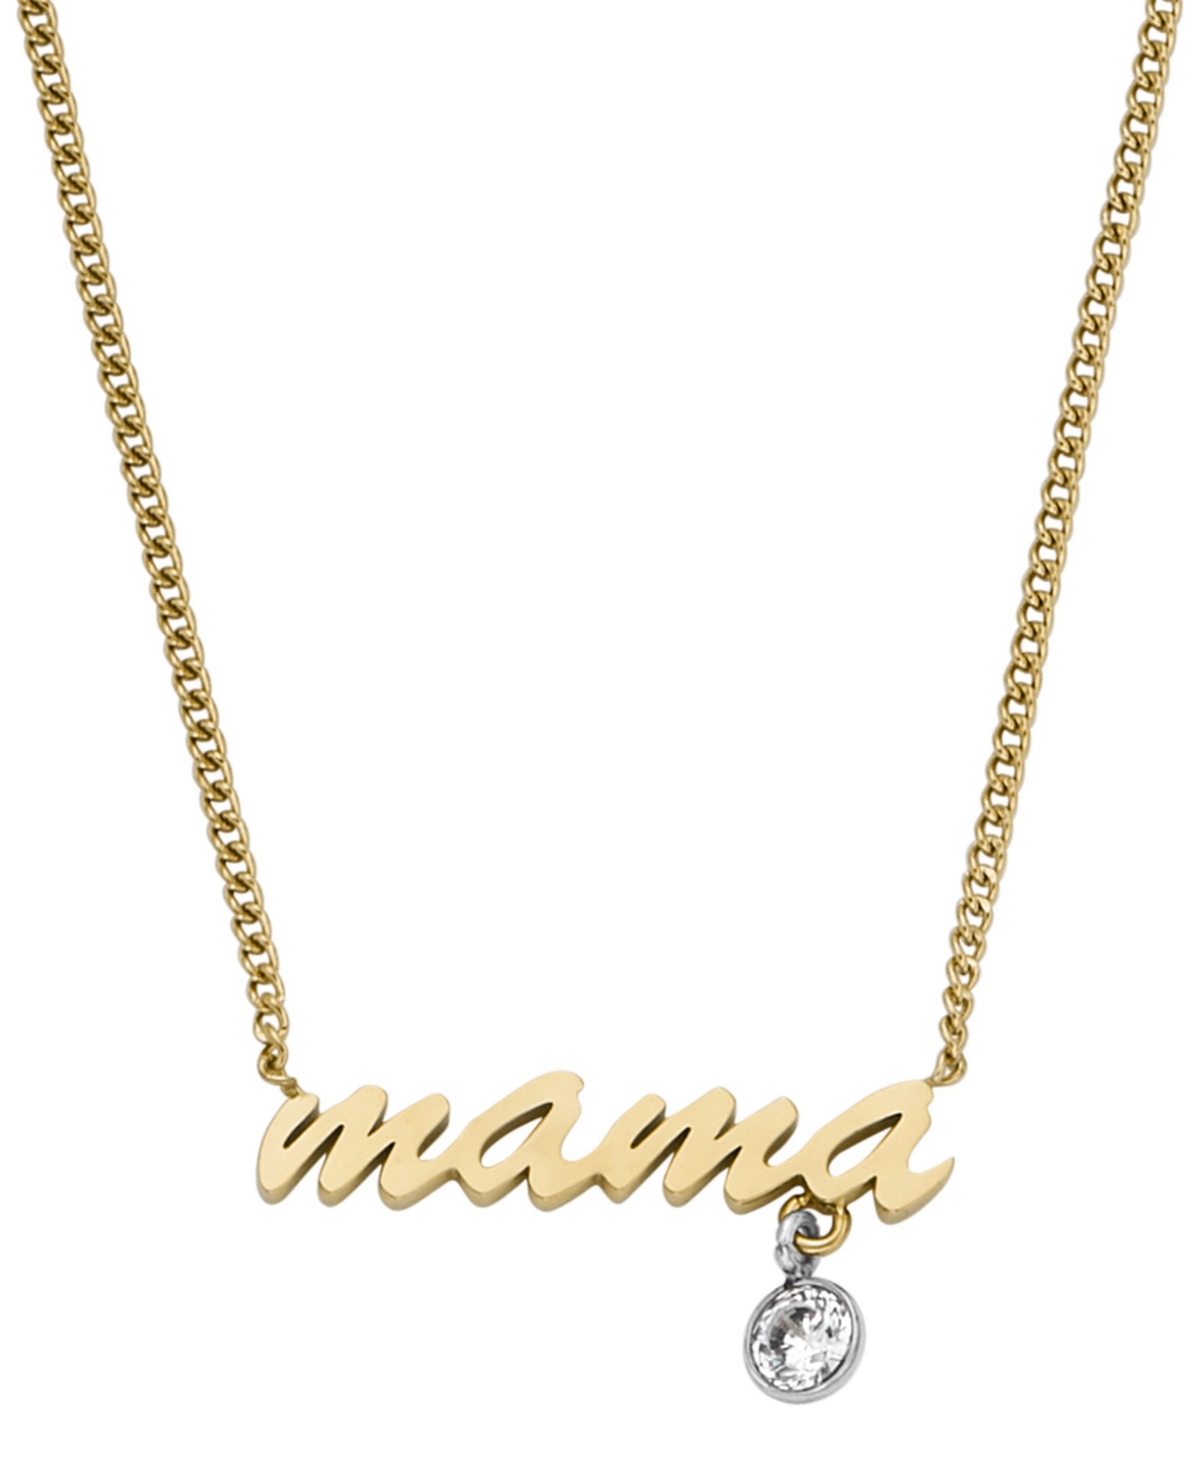 Fossil Two-Tone Sadie Name Stainless Steel Chain Necklace